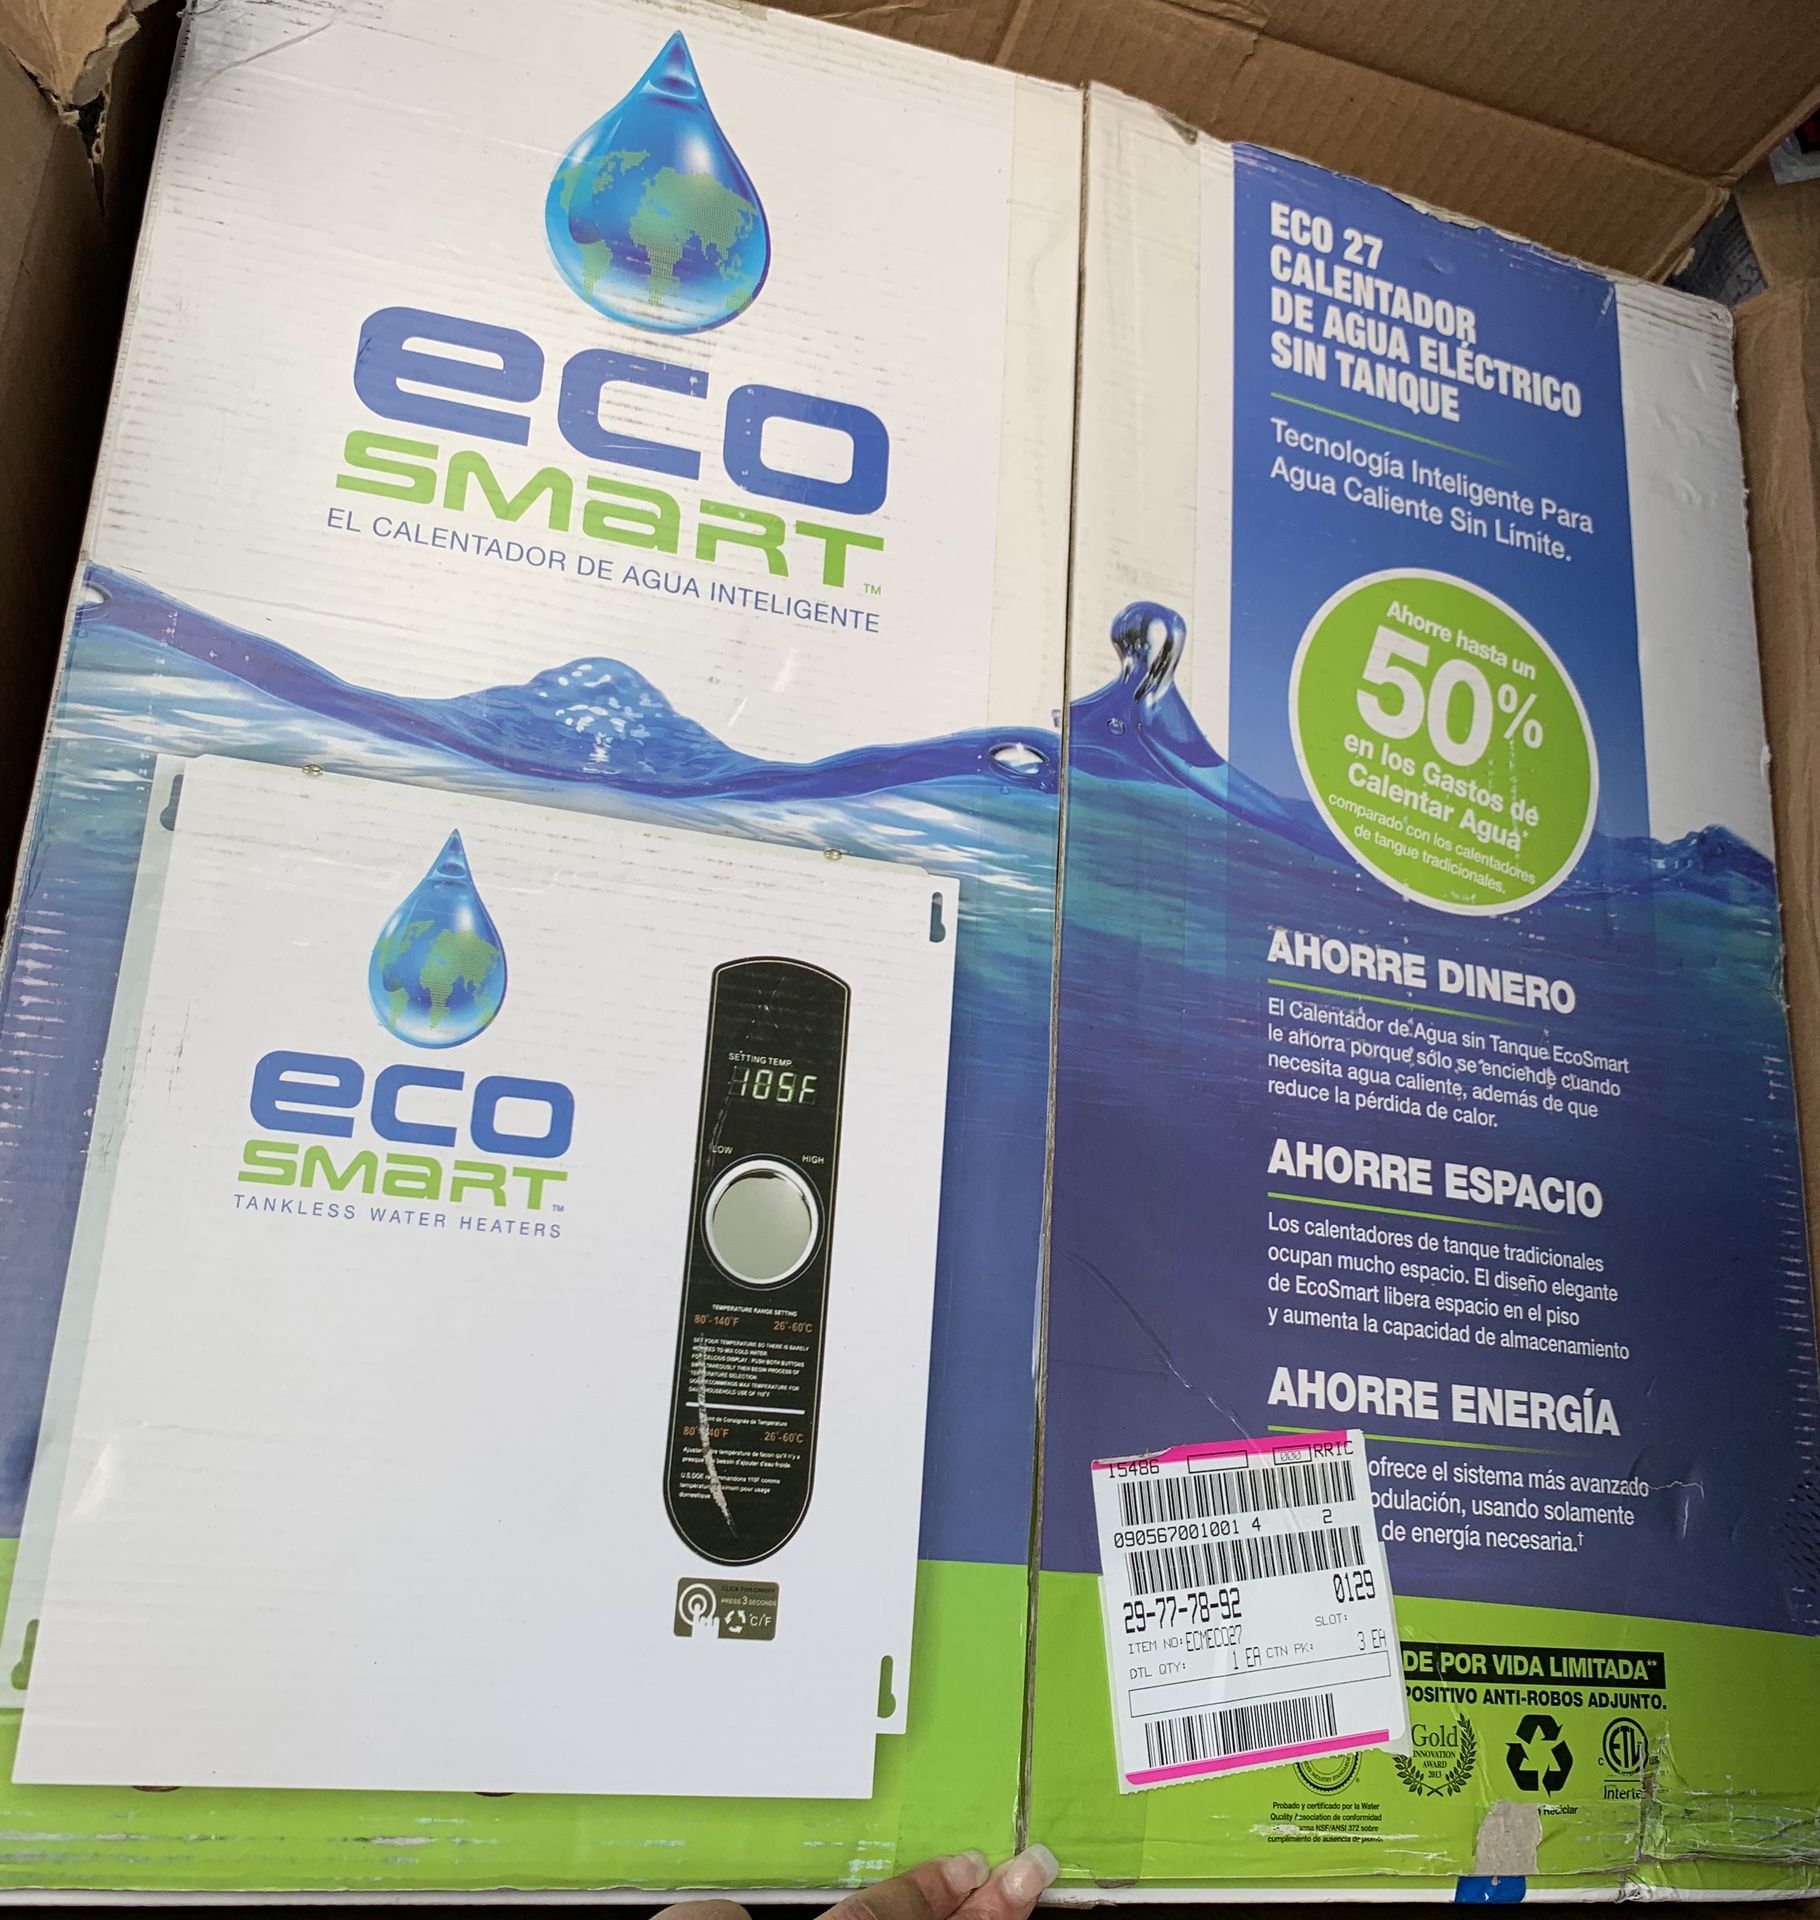 ECO SMART TANKLESS HOT WATER HEATER